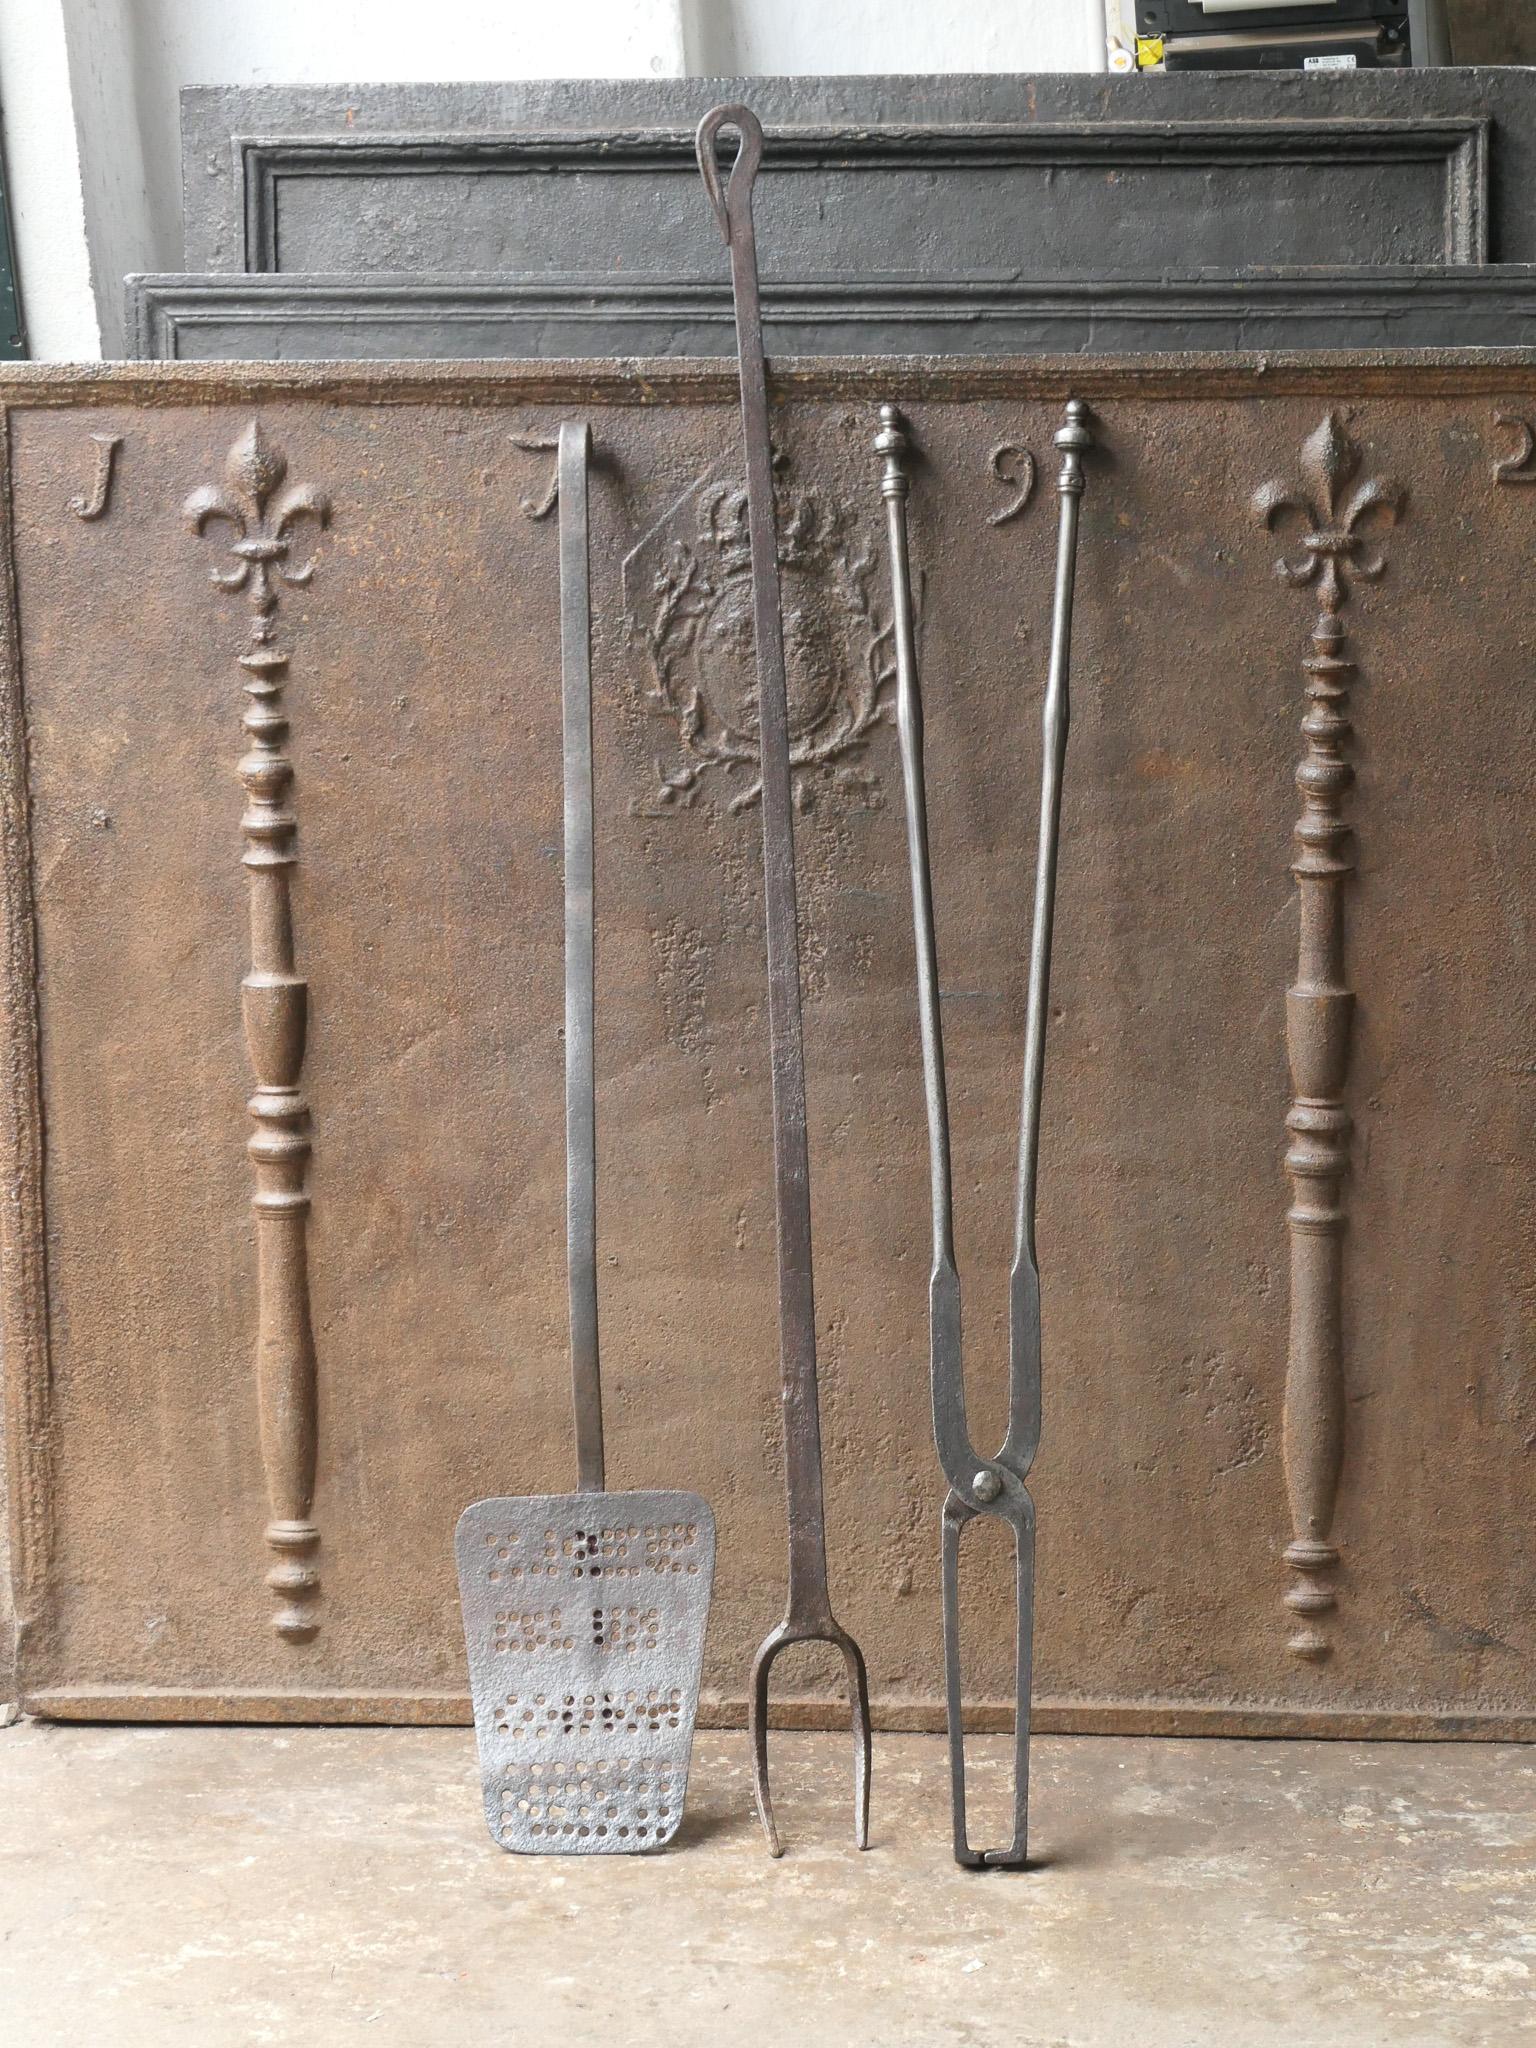 Large 18th-19th century French fireplace tool set. The tool set consists of fireplace tongs, shovel and a fire fork. The tools are made of wrought iron. The set is in a good condition and fit for use in the fireplace.